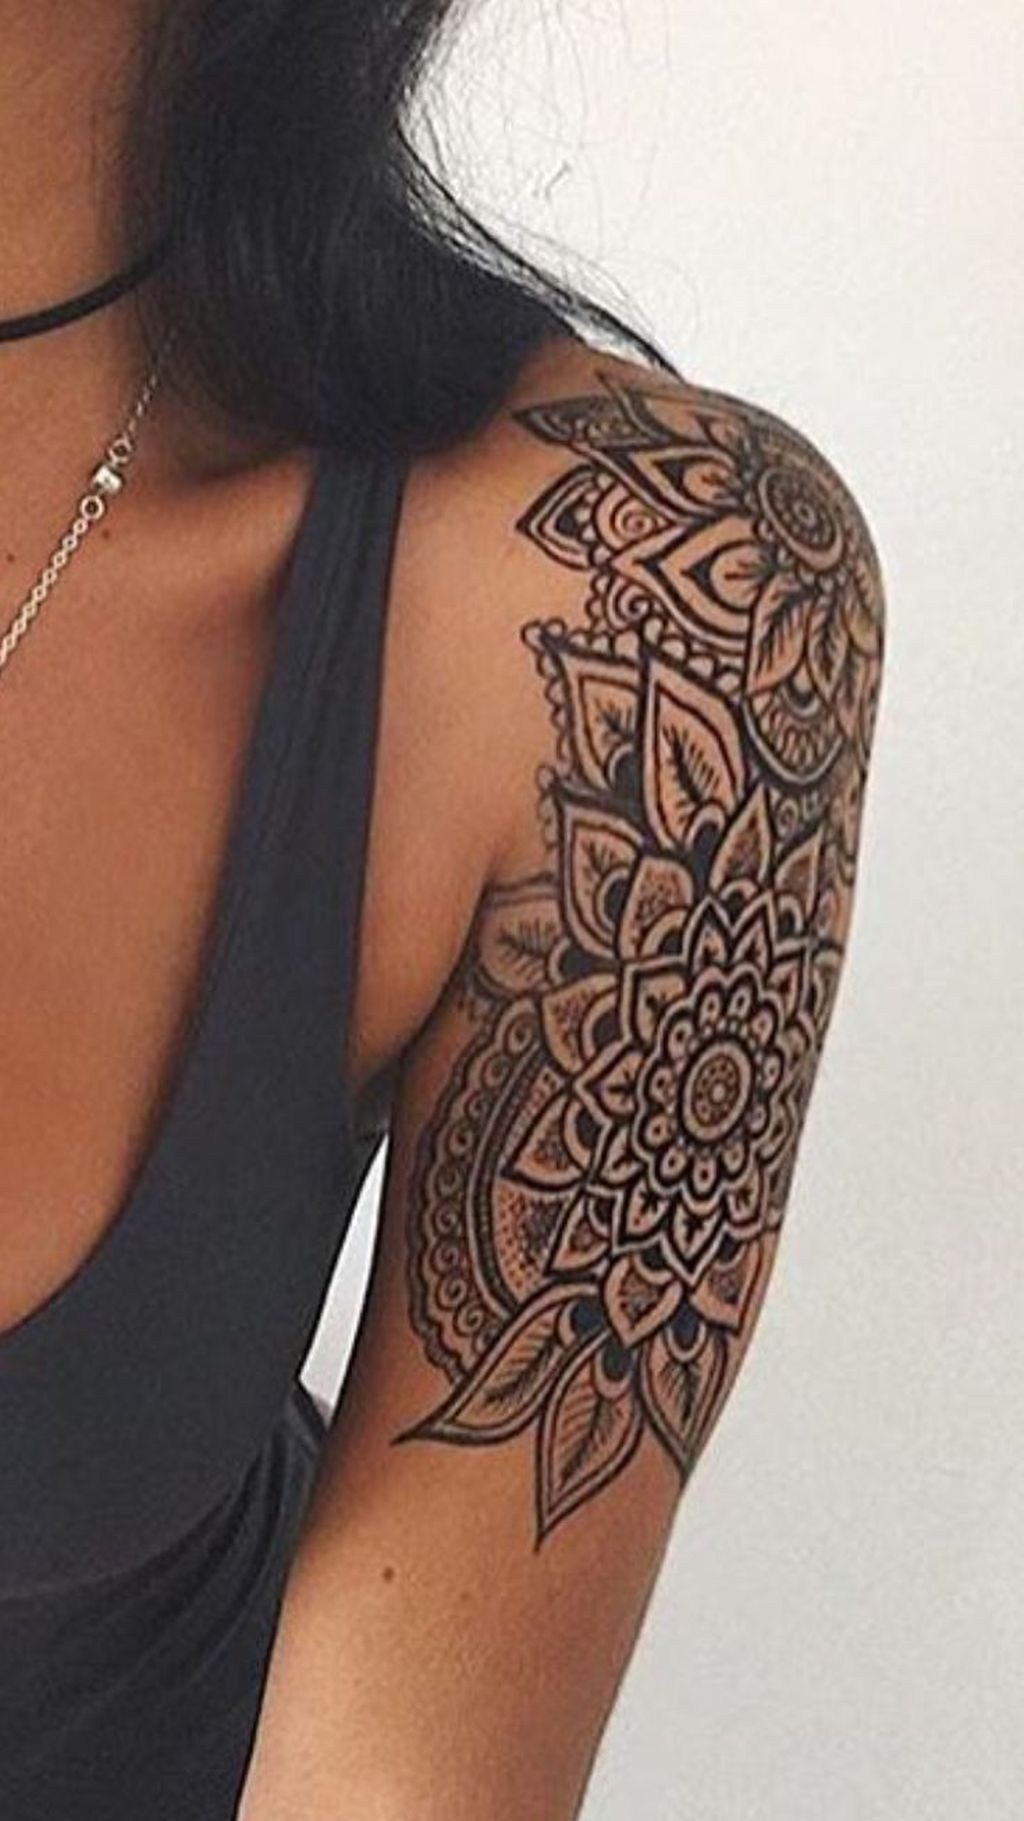 Cute Henna Lace Arm Tattoo Ideas You Should Try 17 Tattooyou inside dimensions 1024 X 1821